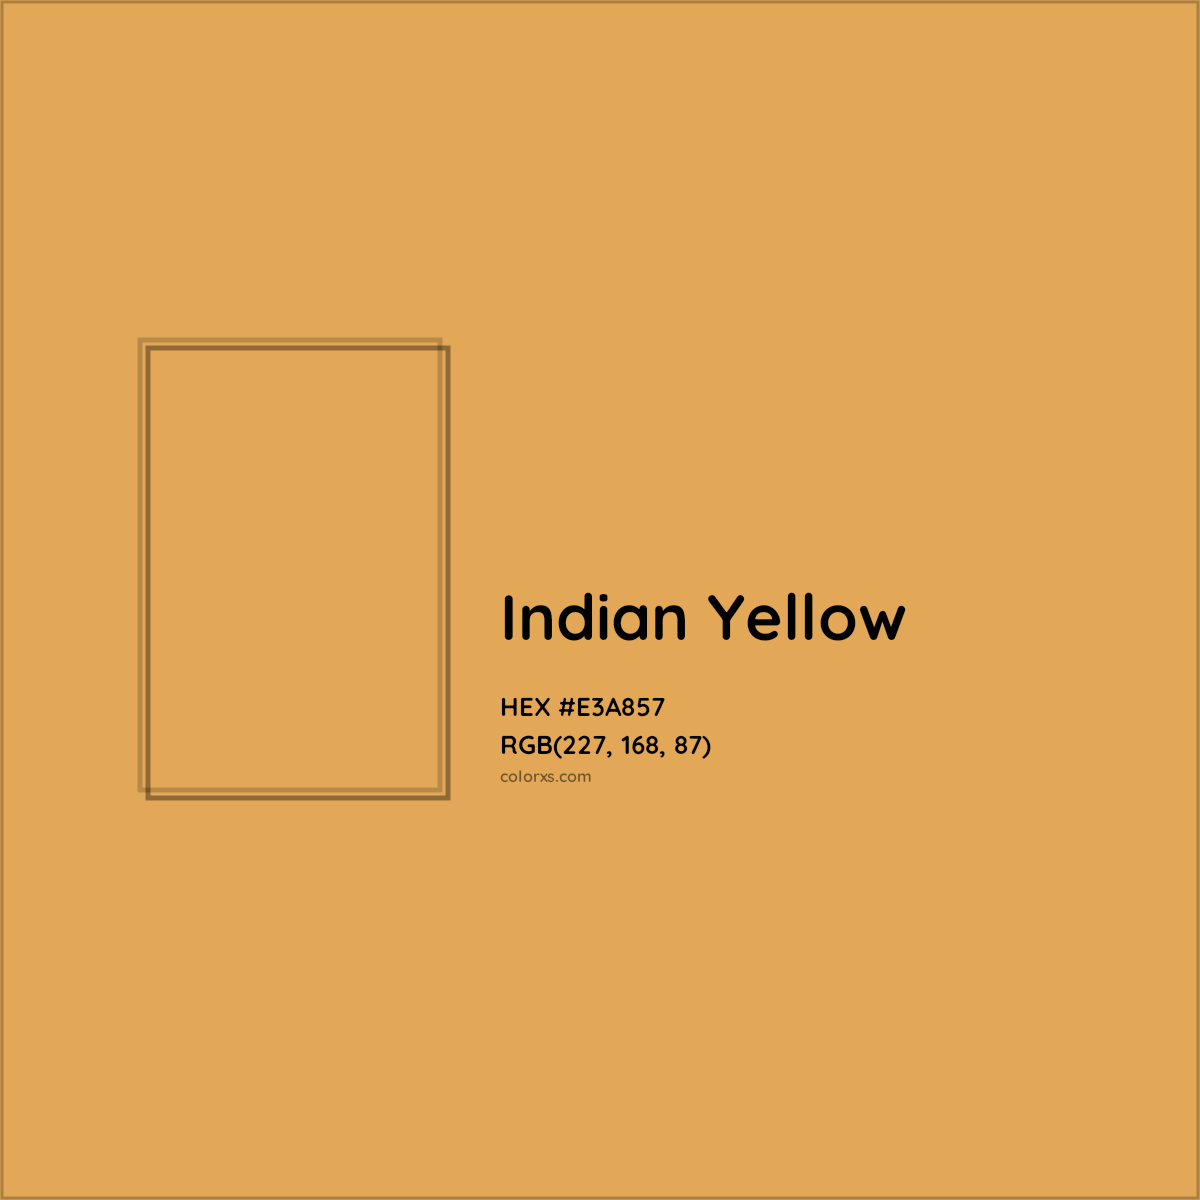 HEX #E3A857 Indian Yellow Color - Color Code